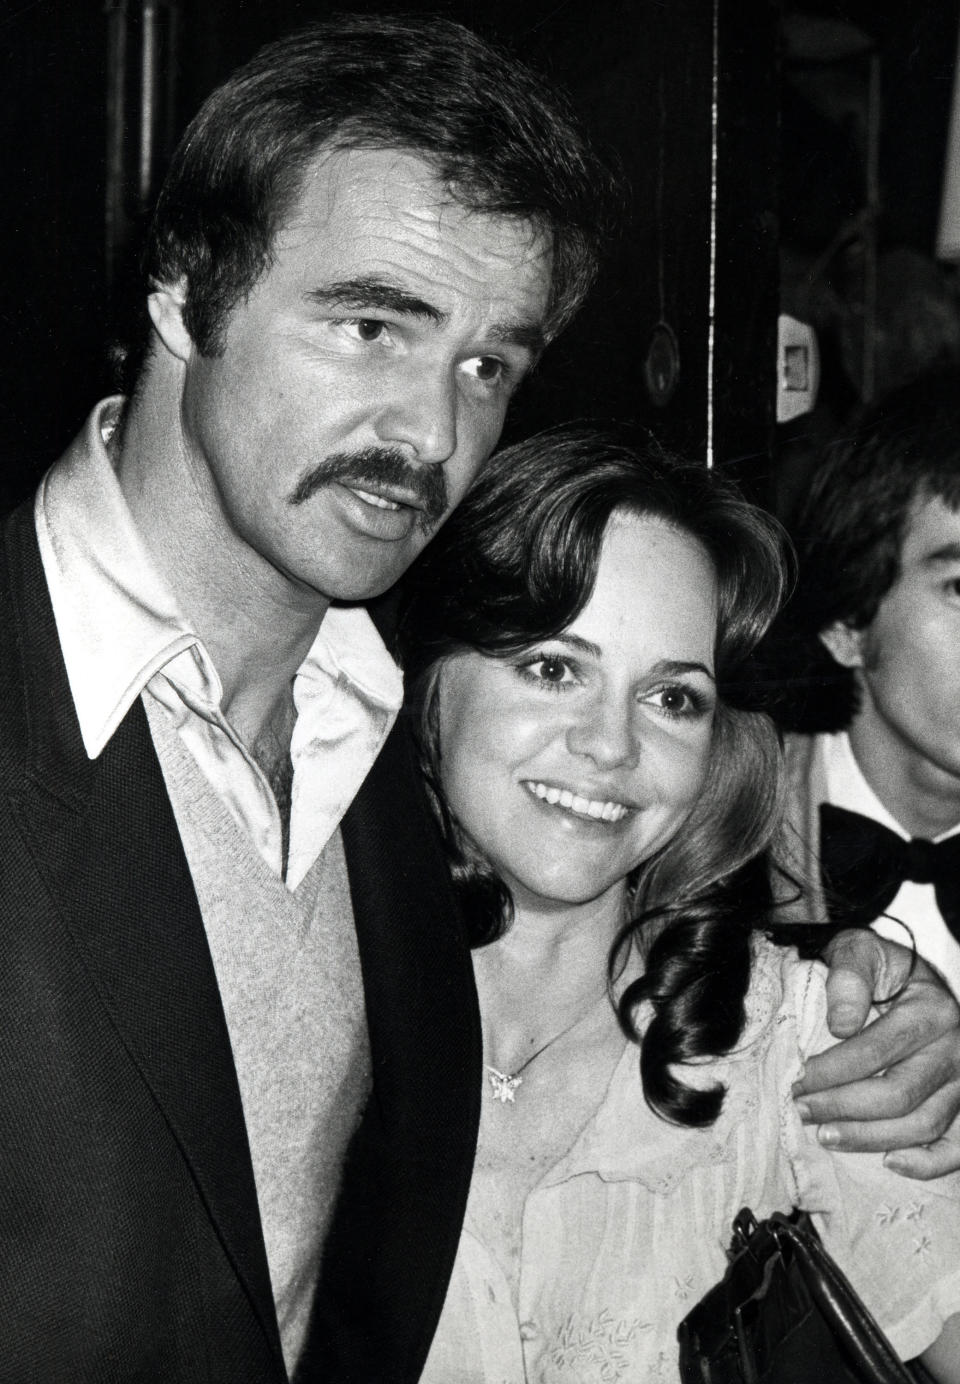 Burt Reynolds and Sally Field in 1978. (Photo: Ron Galella via Getty Images)